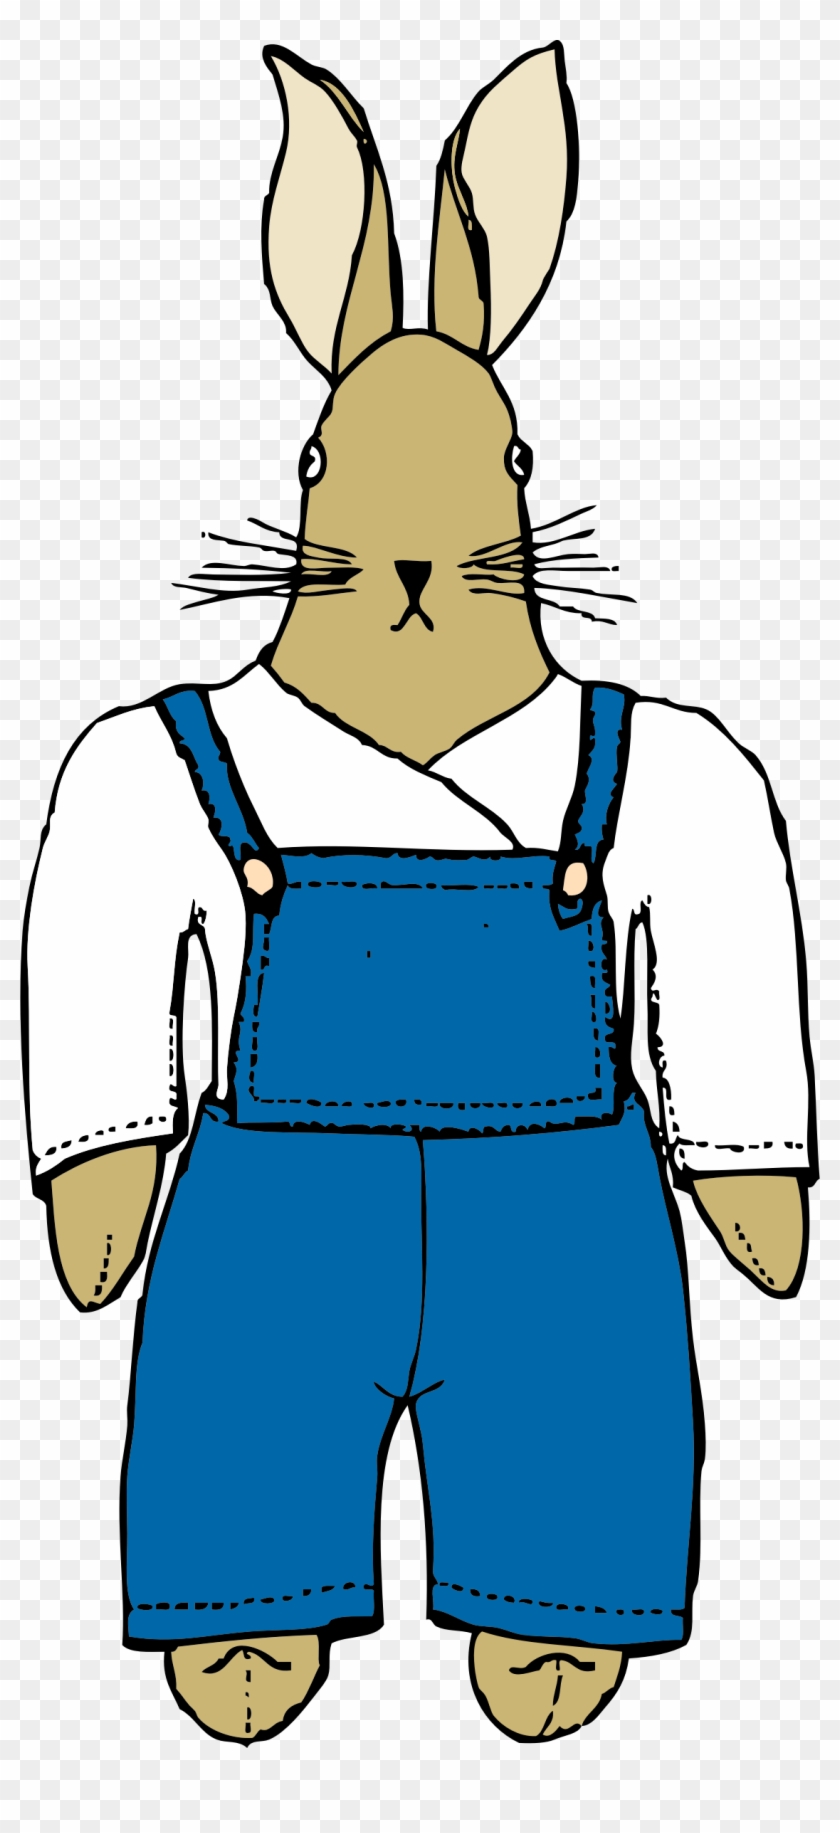 Free Bunny In Overalls Front View - Overall Clip Art #237586